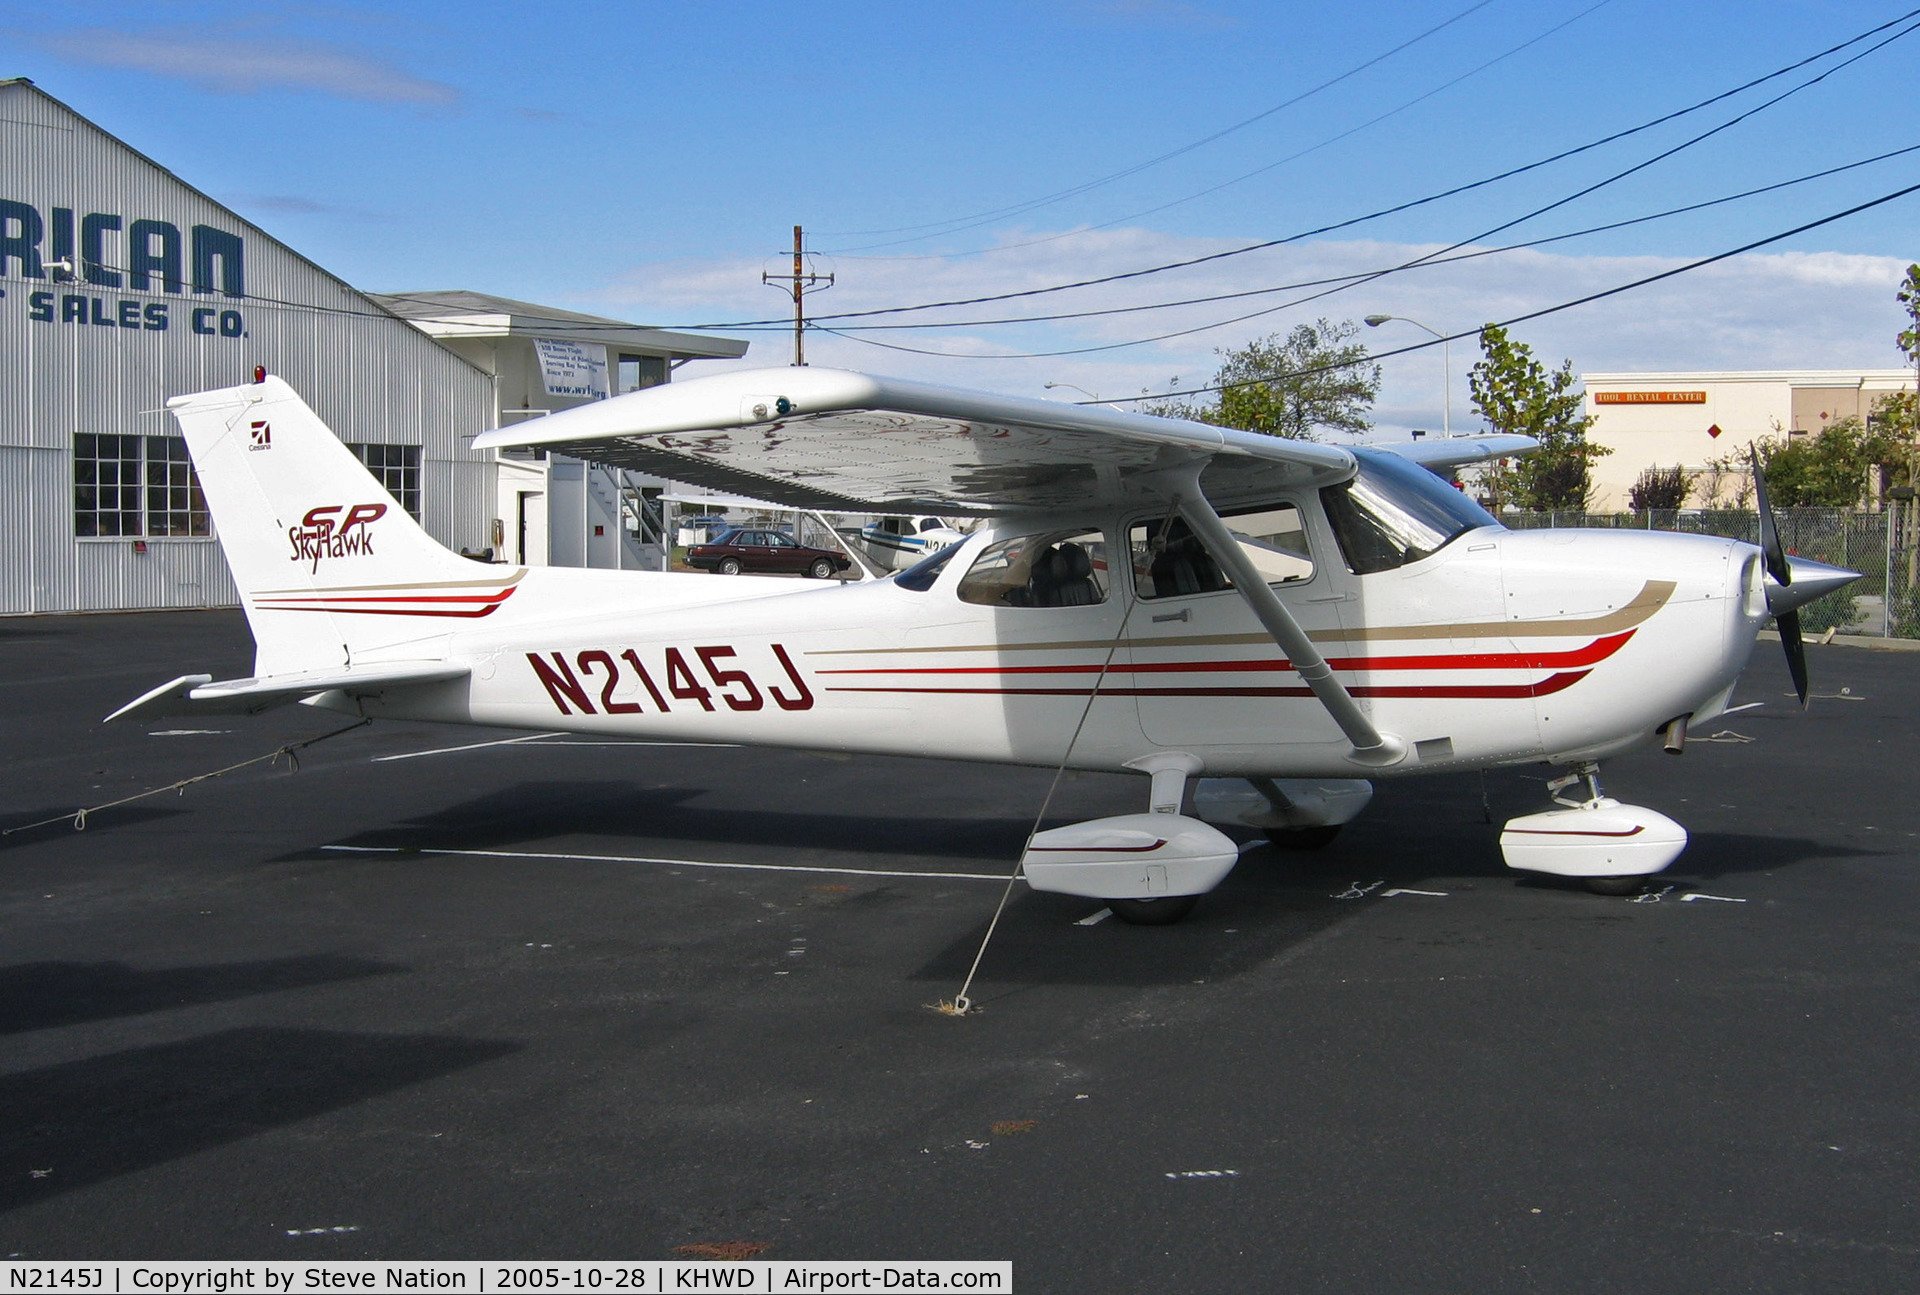 N2145J, 2003 Cessna 172S C/N 172S9418, 2003 Cessna 172S @ Hayward, CA home base in Oct 2005 (to new owner in Florida by Jun 2006)